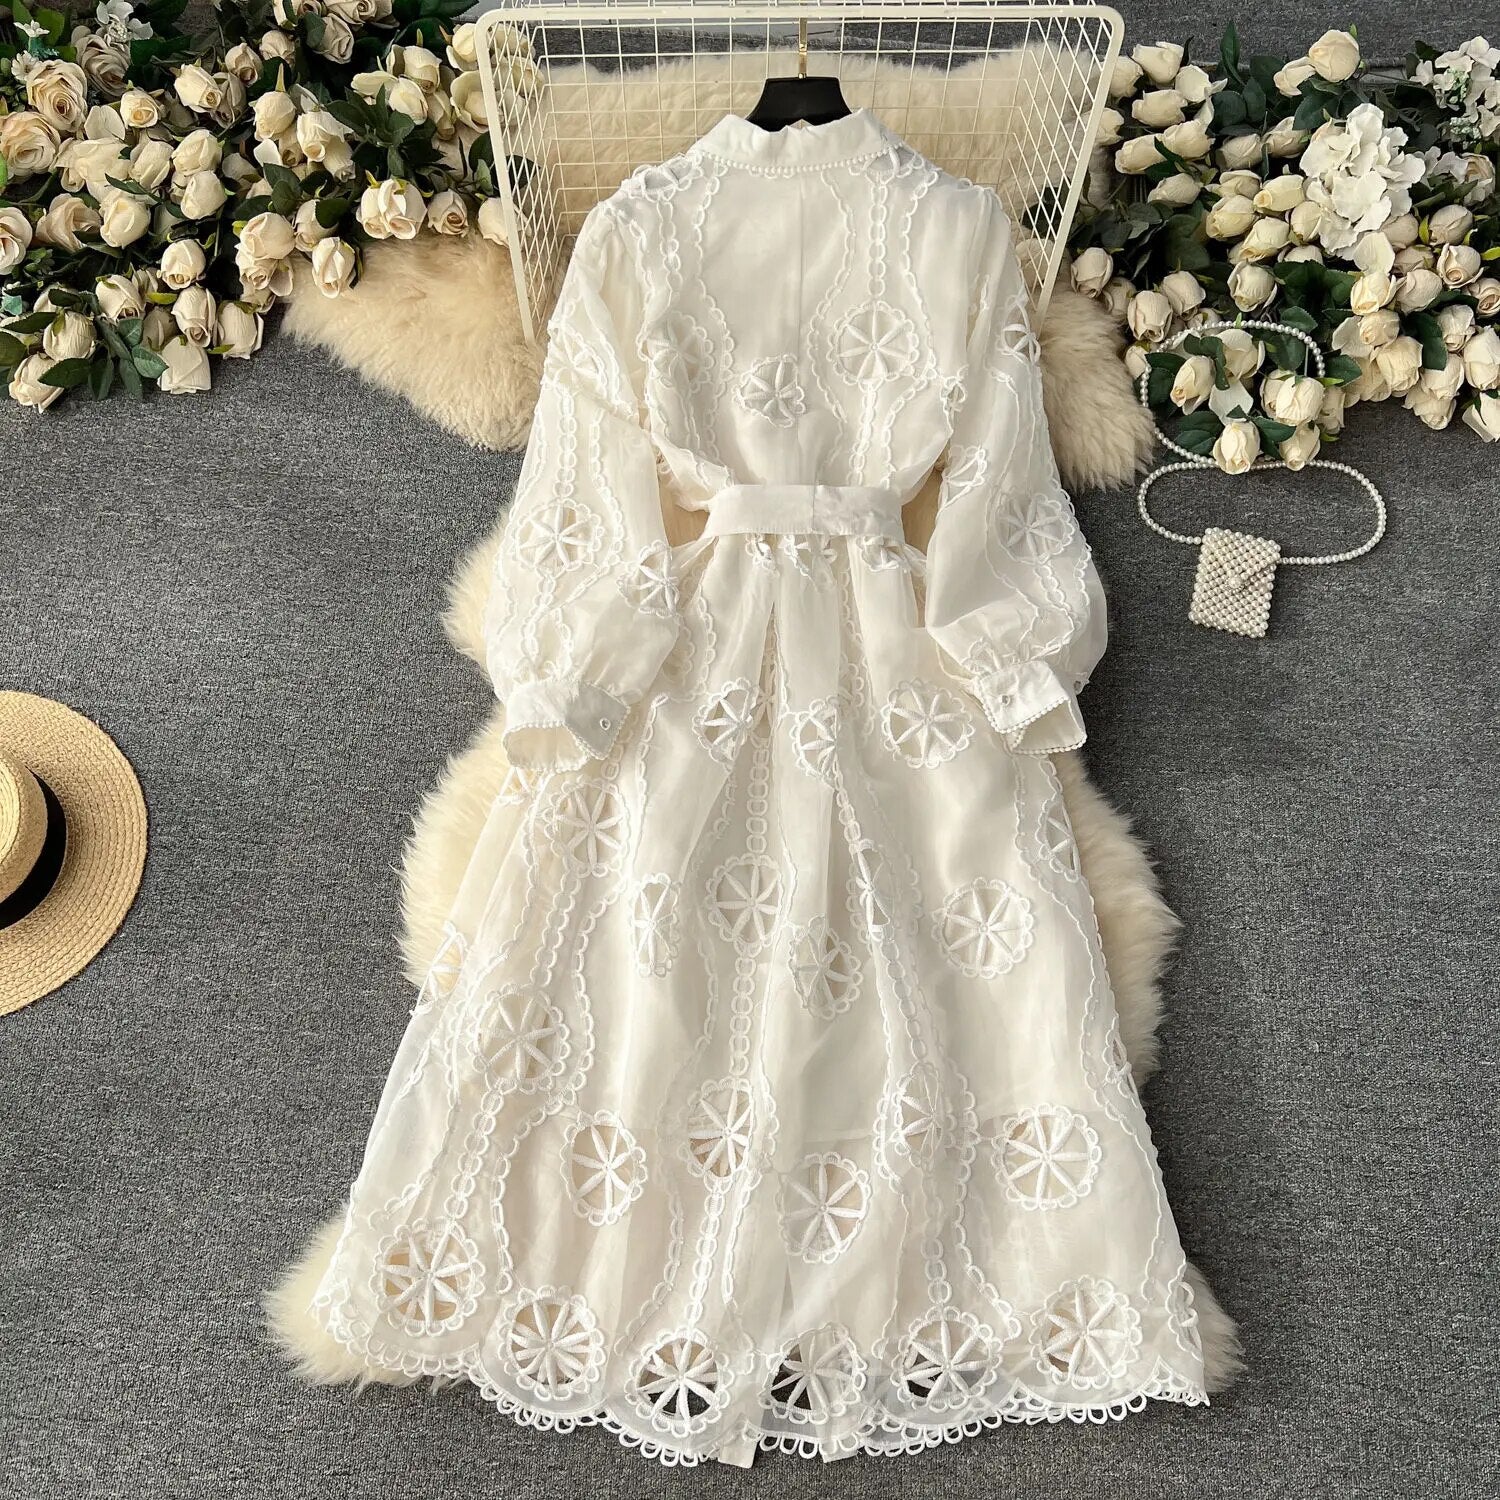 Cora Lace Hollow out Dress